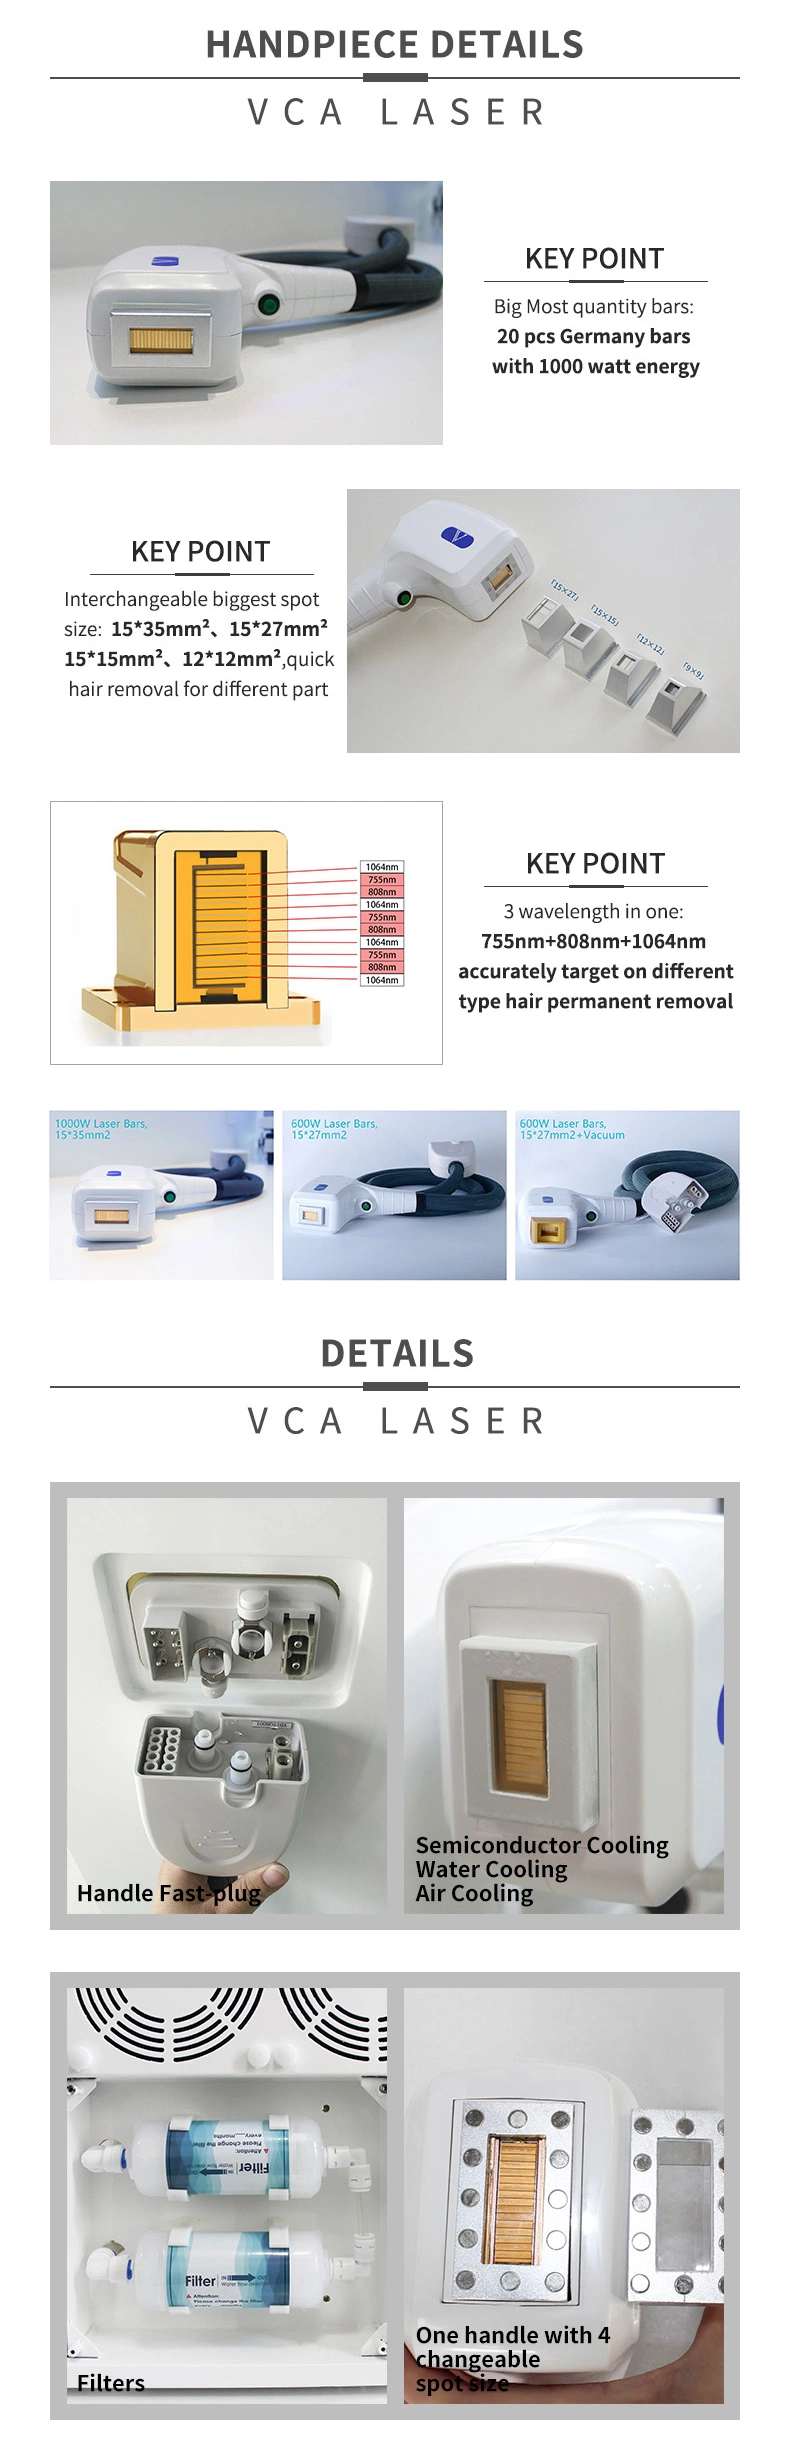 Good Hair Removal Machine 808nm Laser Diode Laser Hair Removal